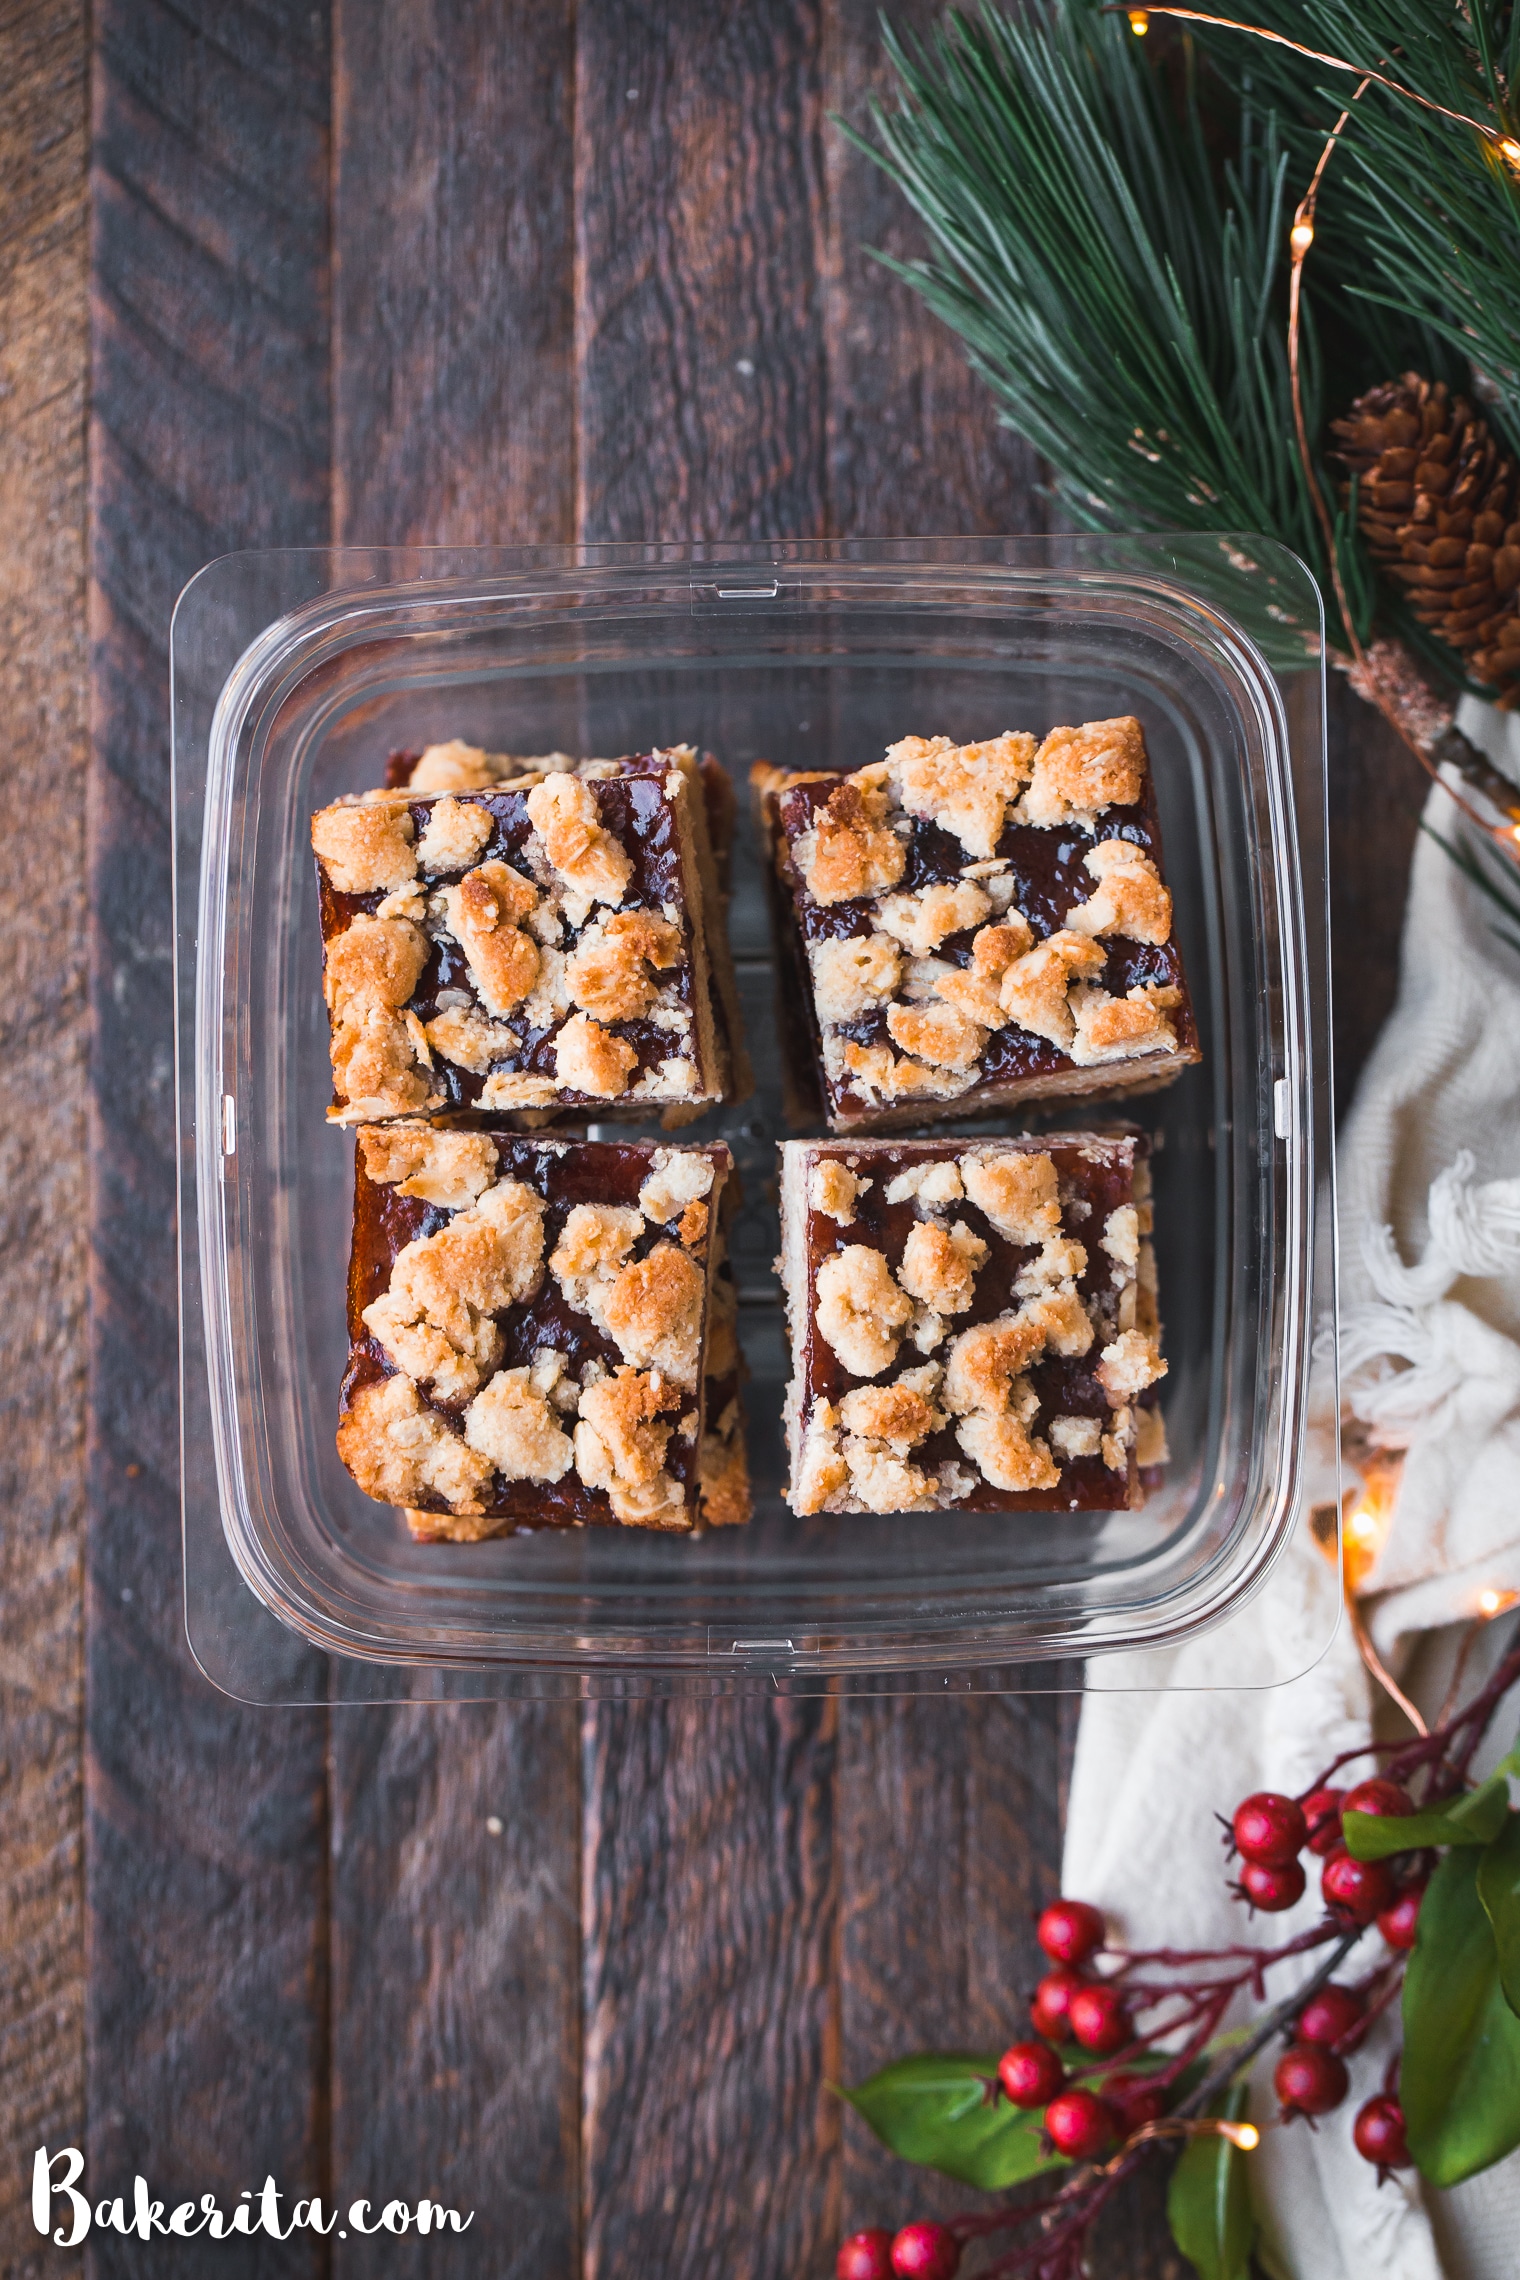 These Gluten-Free Vegan Jam Bars are made with a scrumptious oatmeal crumble crust that doubles as a crumb topping and a thick layer of jam in the middle. They're the perfect easy, vegan holiday dessert.